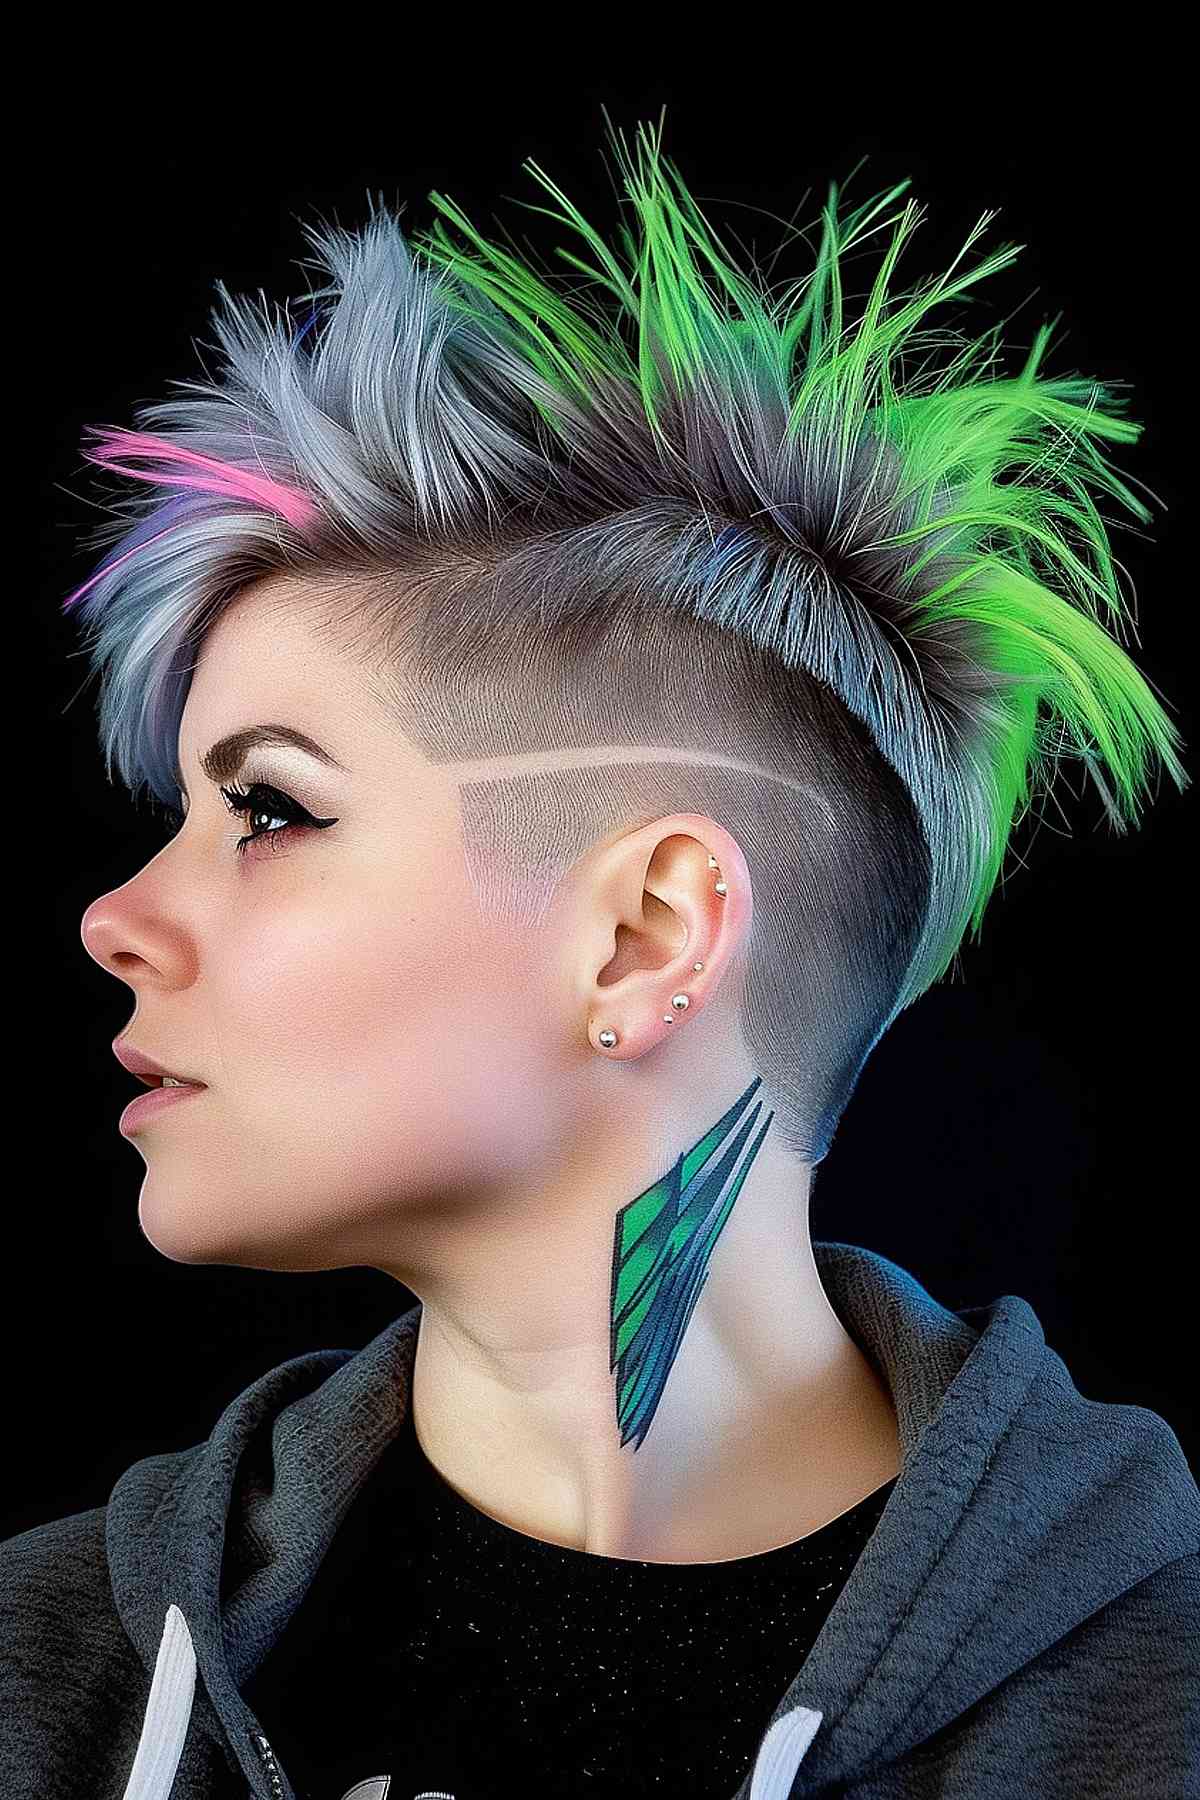 Edgy pixie cut with electric green, pink, and blue highlights and a precisely shaved side featuring a triangular design, perfect for a bold, low-maintenance style.